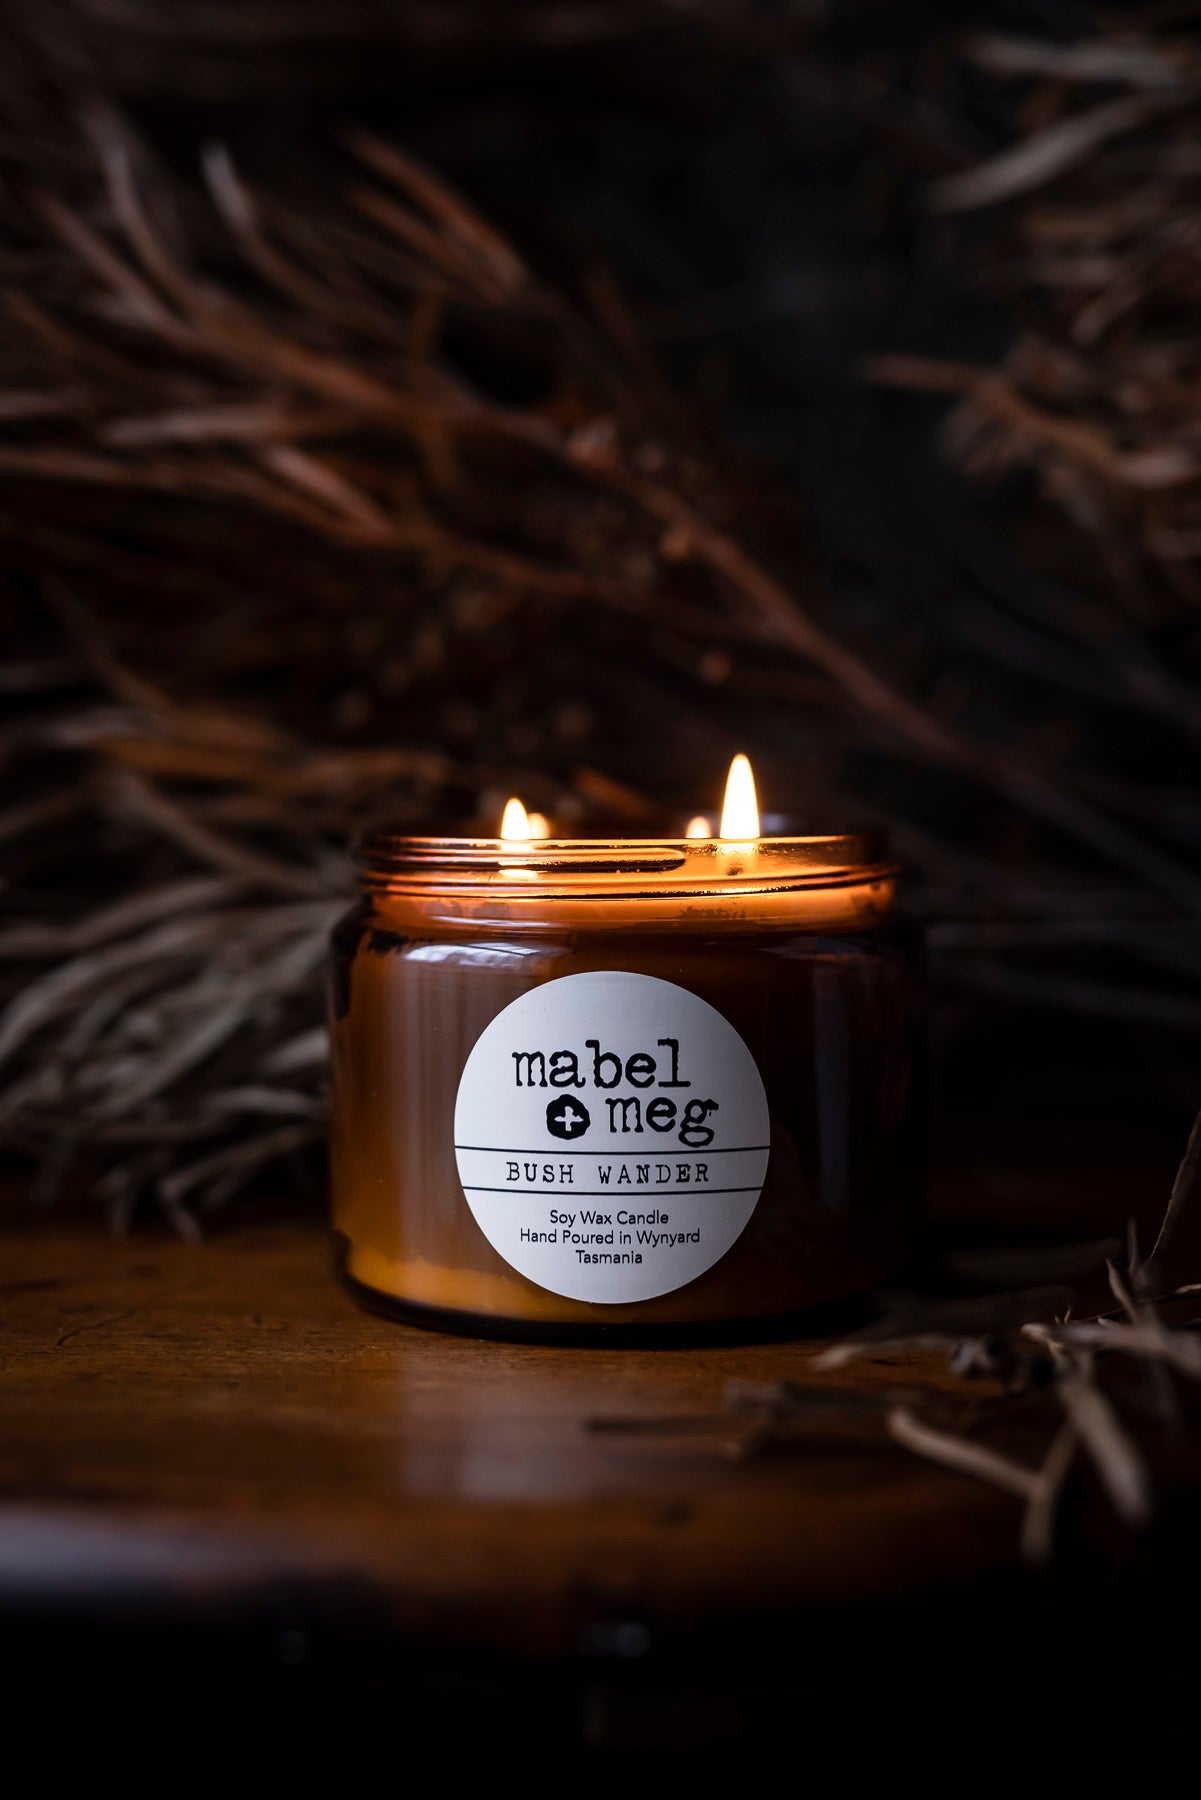 Bush Wander soy candle by mable + meg